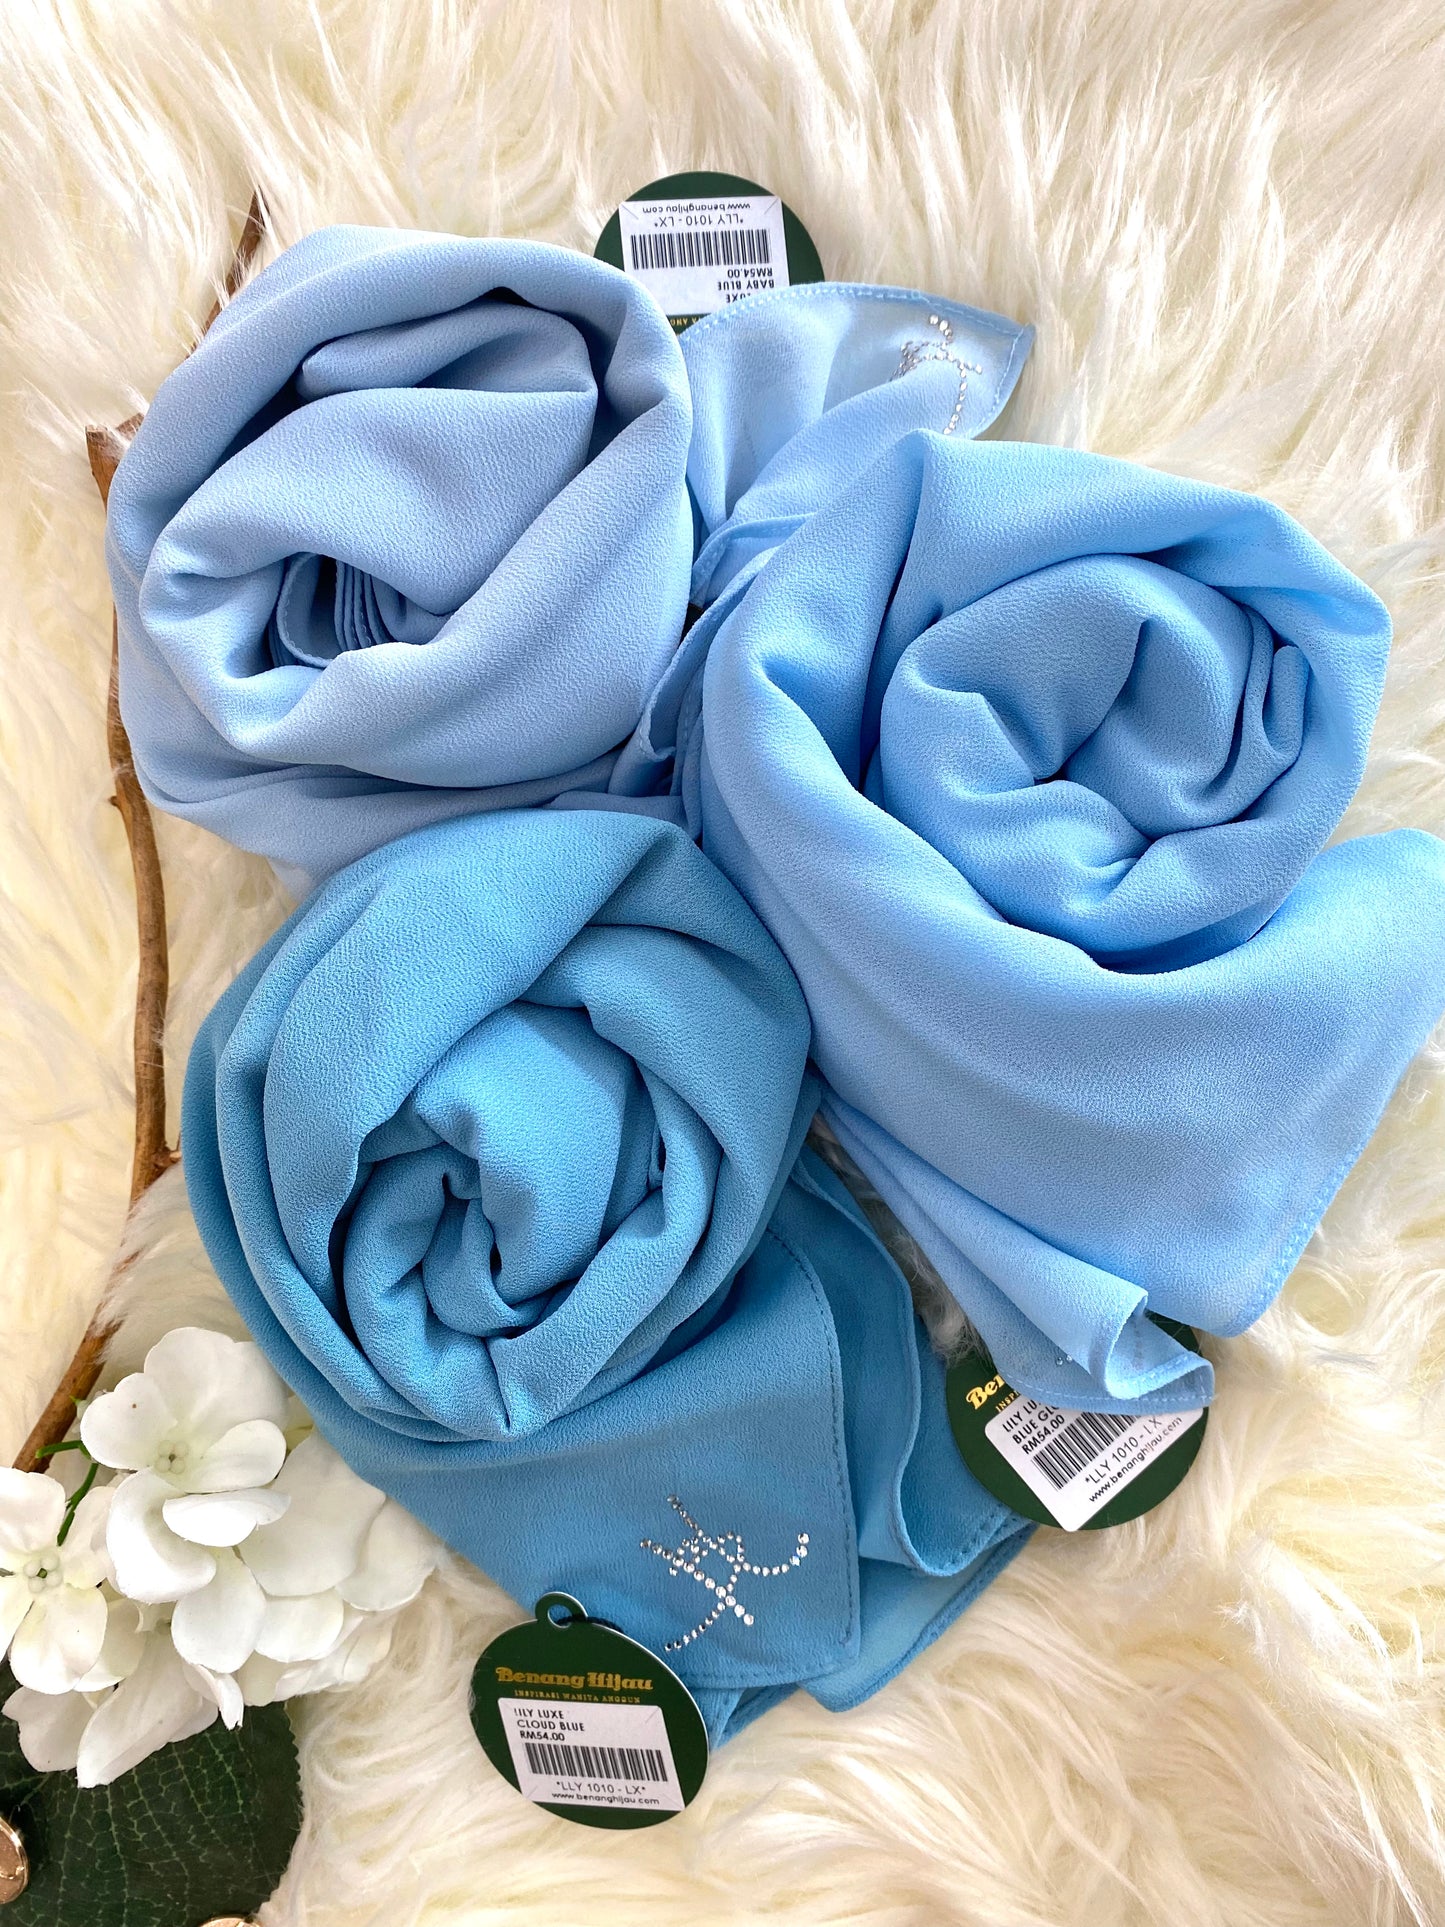 Instant Shawl Lily Luxe - 56 Cloud Blue